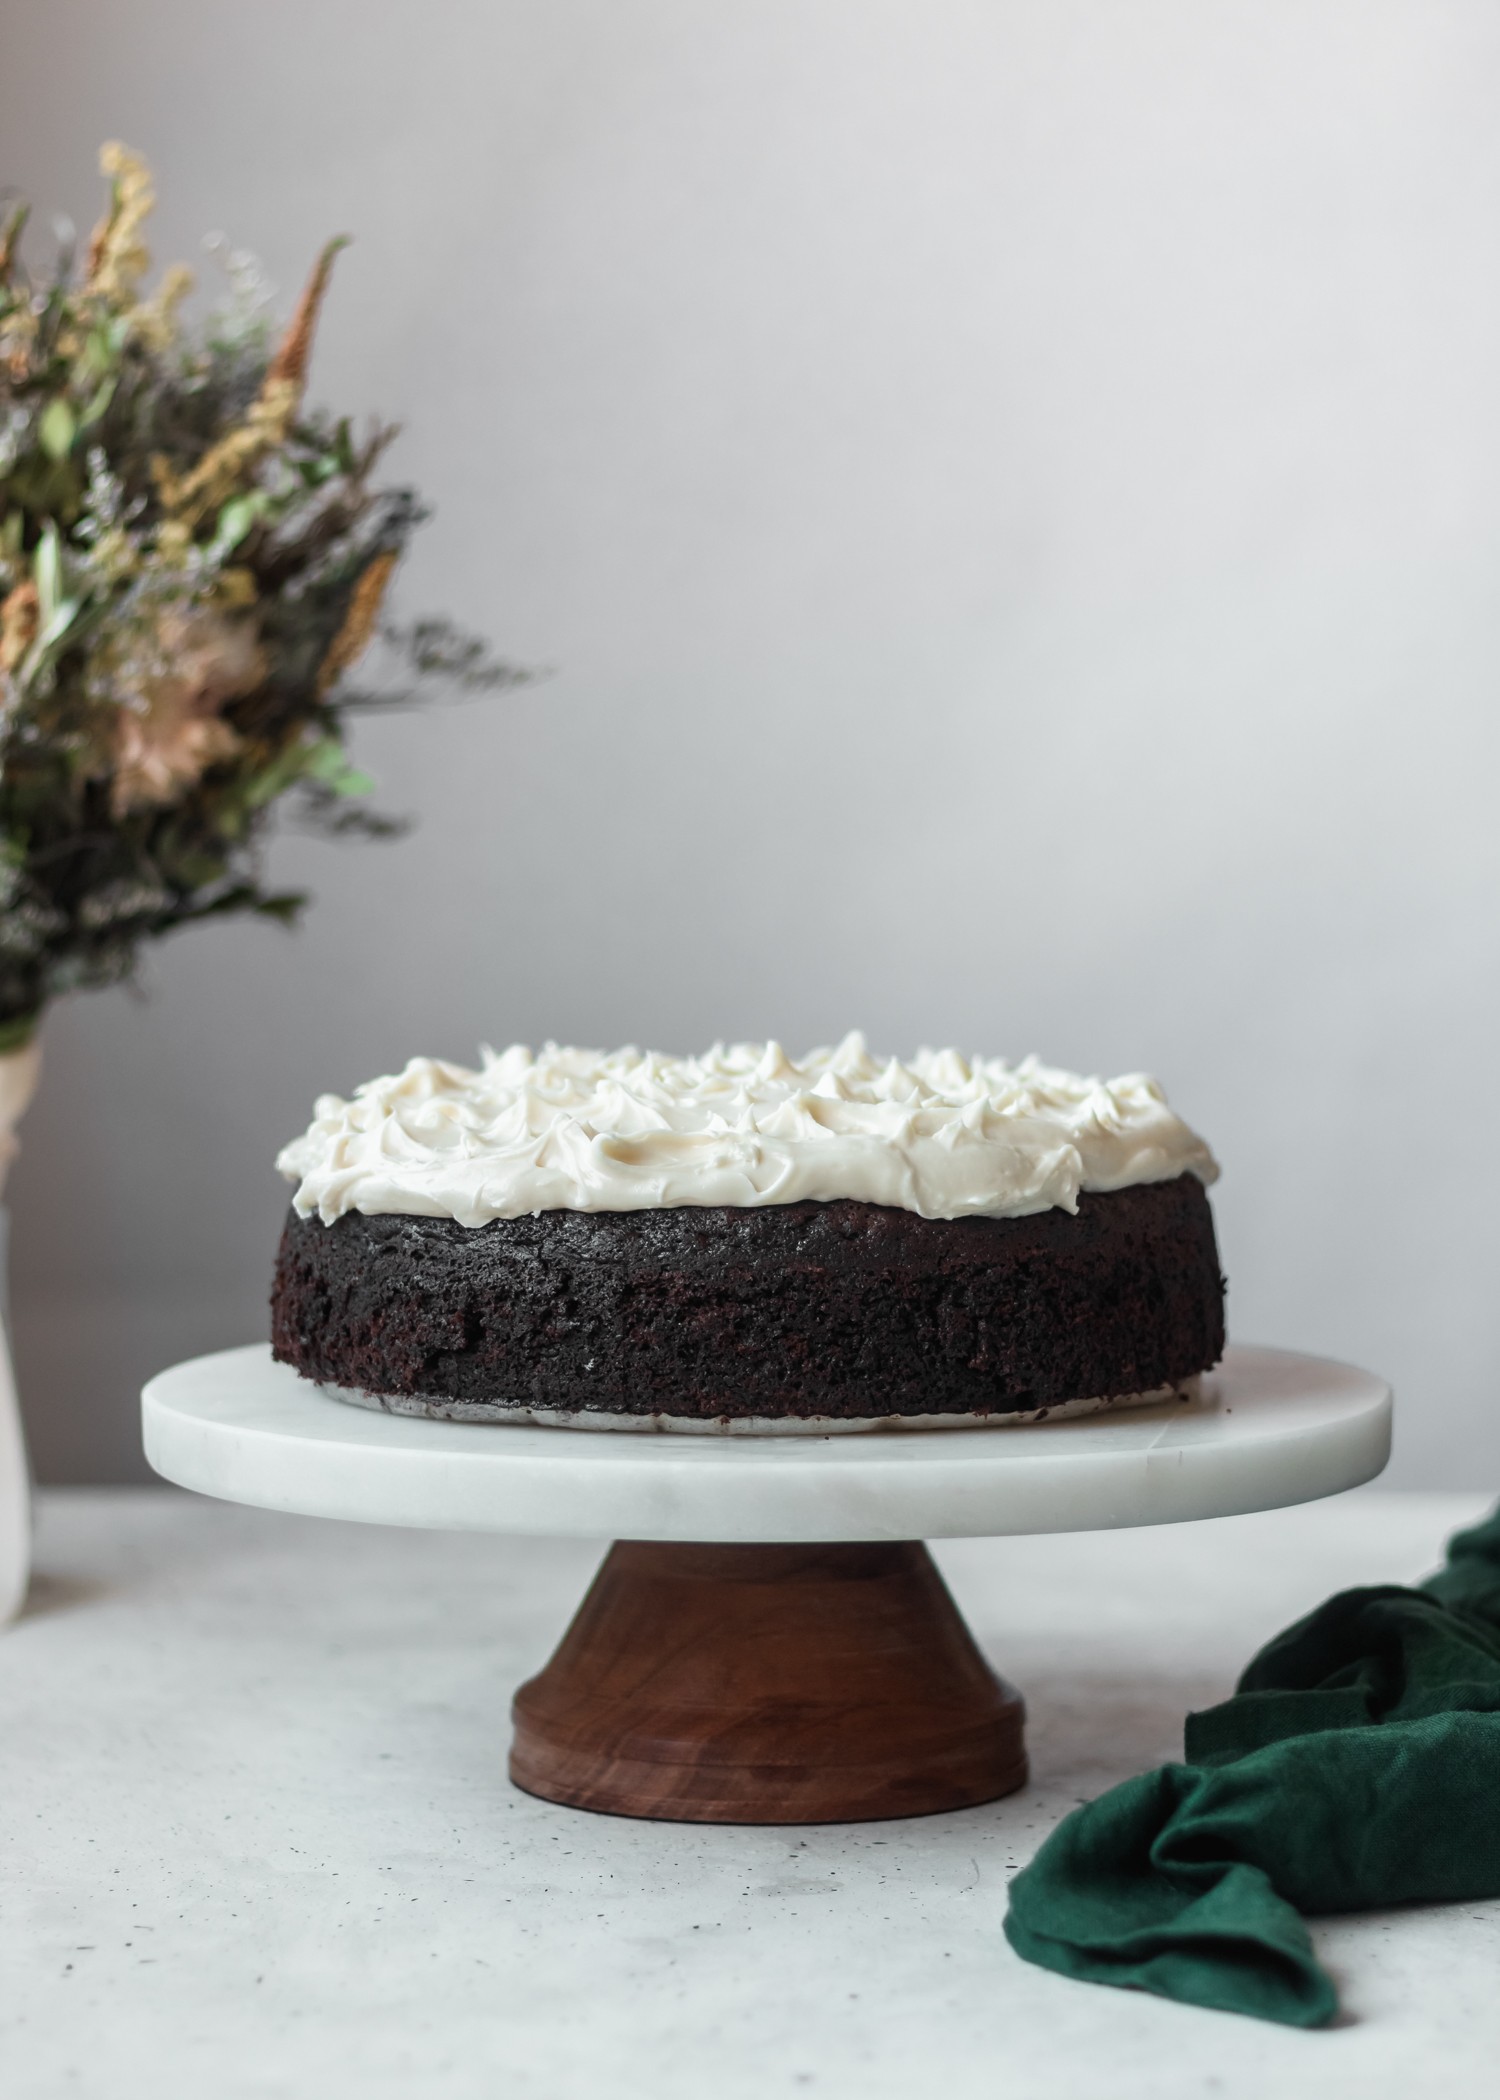 Stout cake on a marble and wood stand against a white background with a bouquet of flowers on the left side and a green linen on the right side.